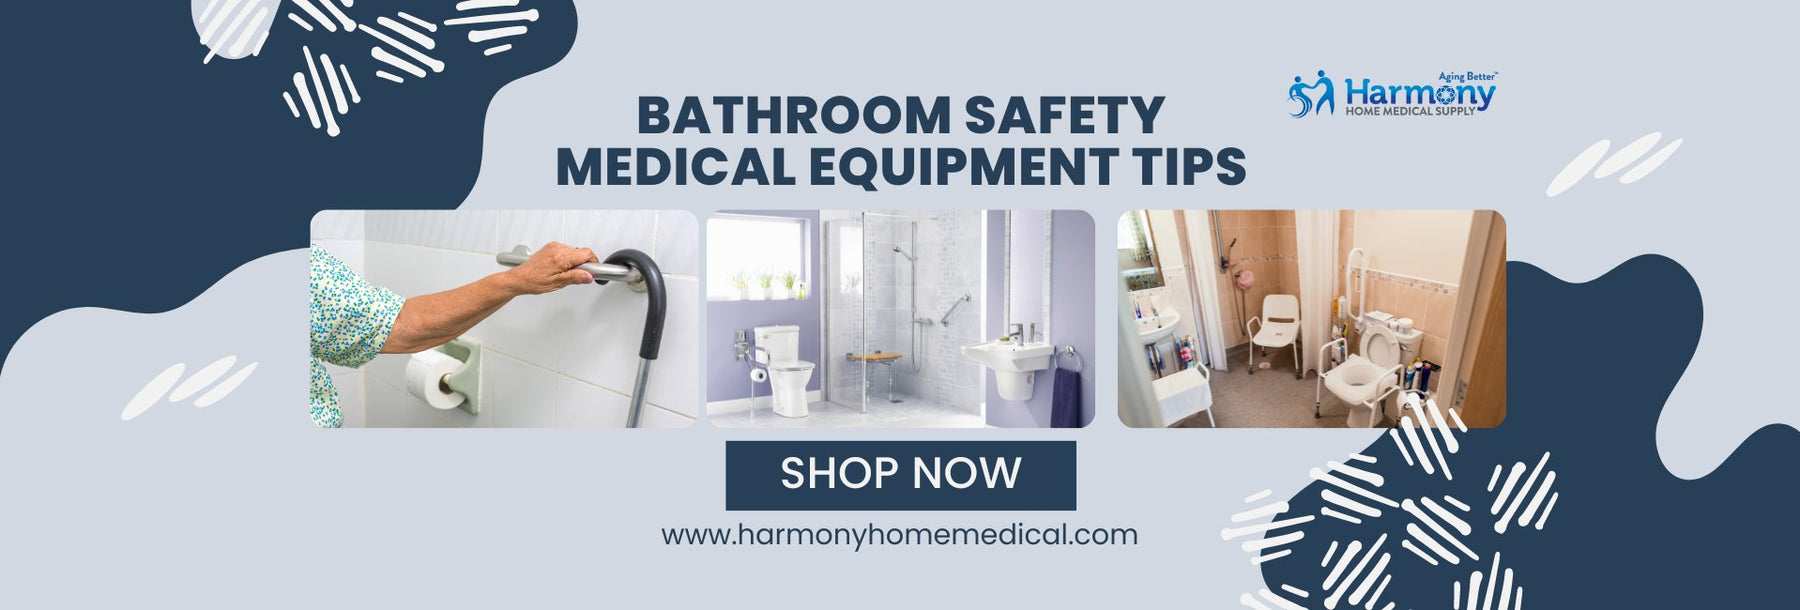 Bathroom Safety Medical Equipment Tips - Harmony Home Medical Supply